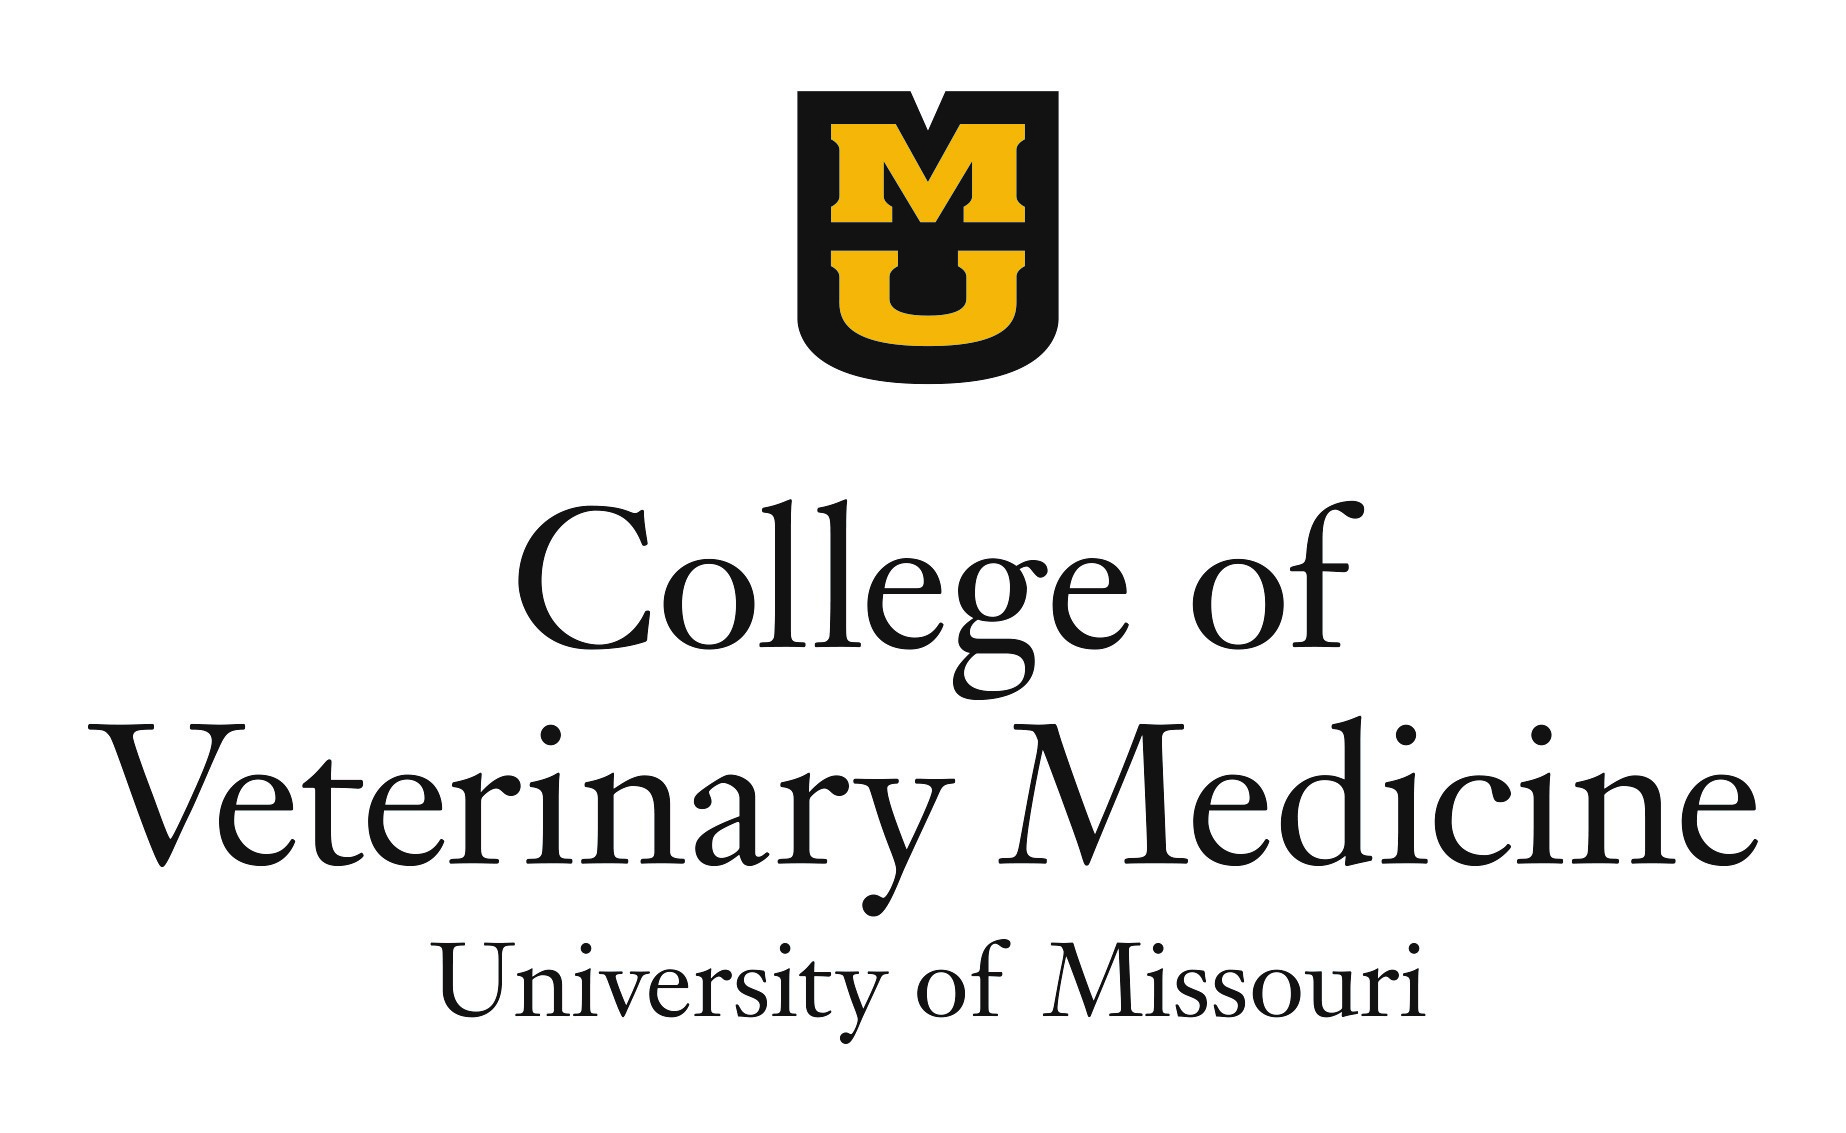 Veterinary Medical School Admission Requirements (VMSAR)